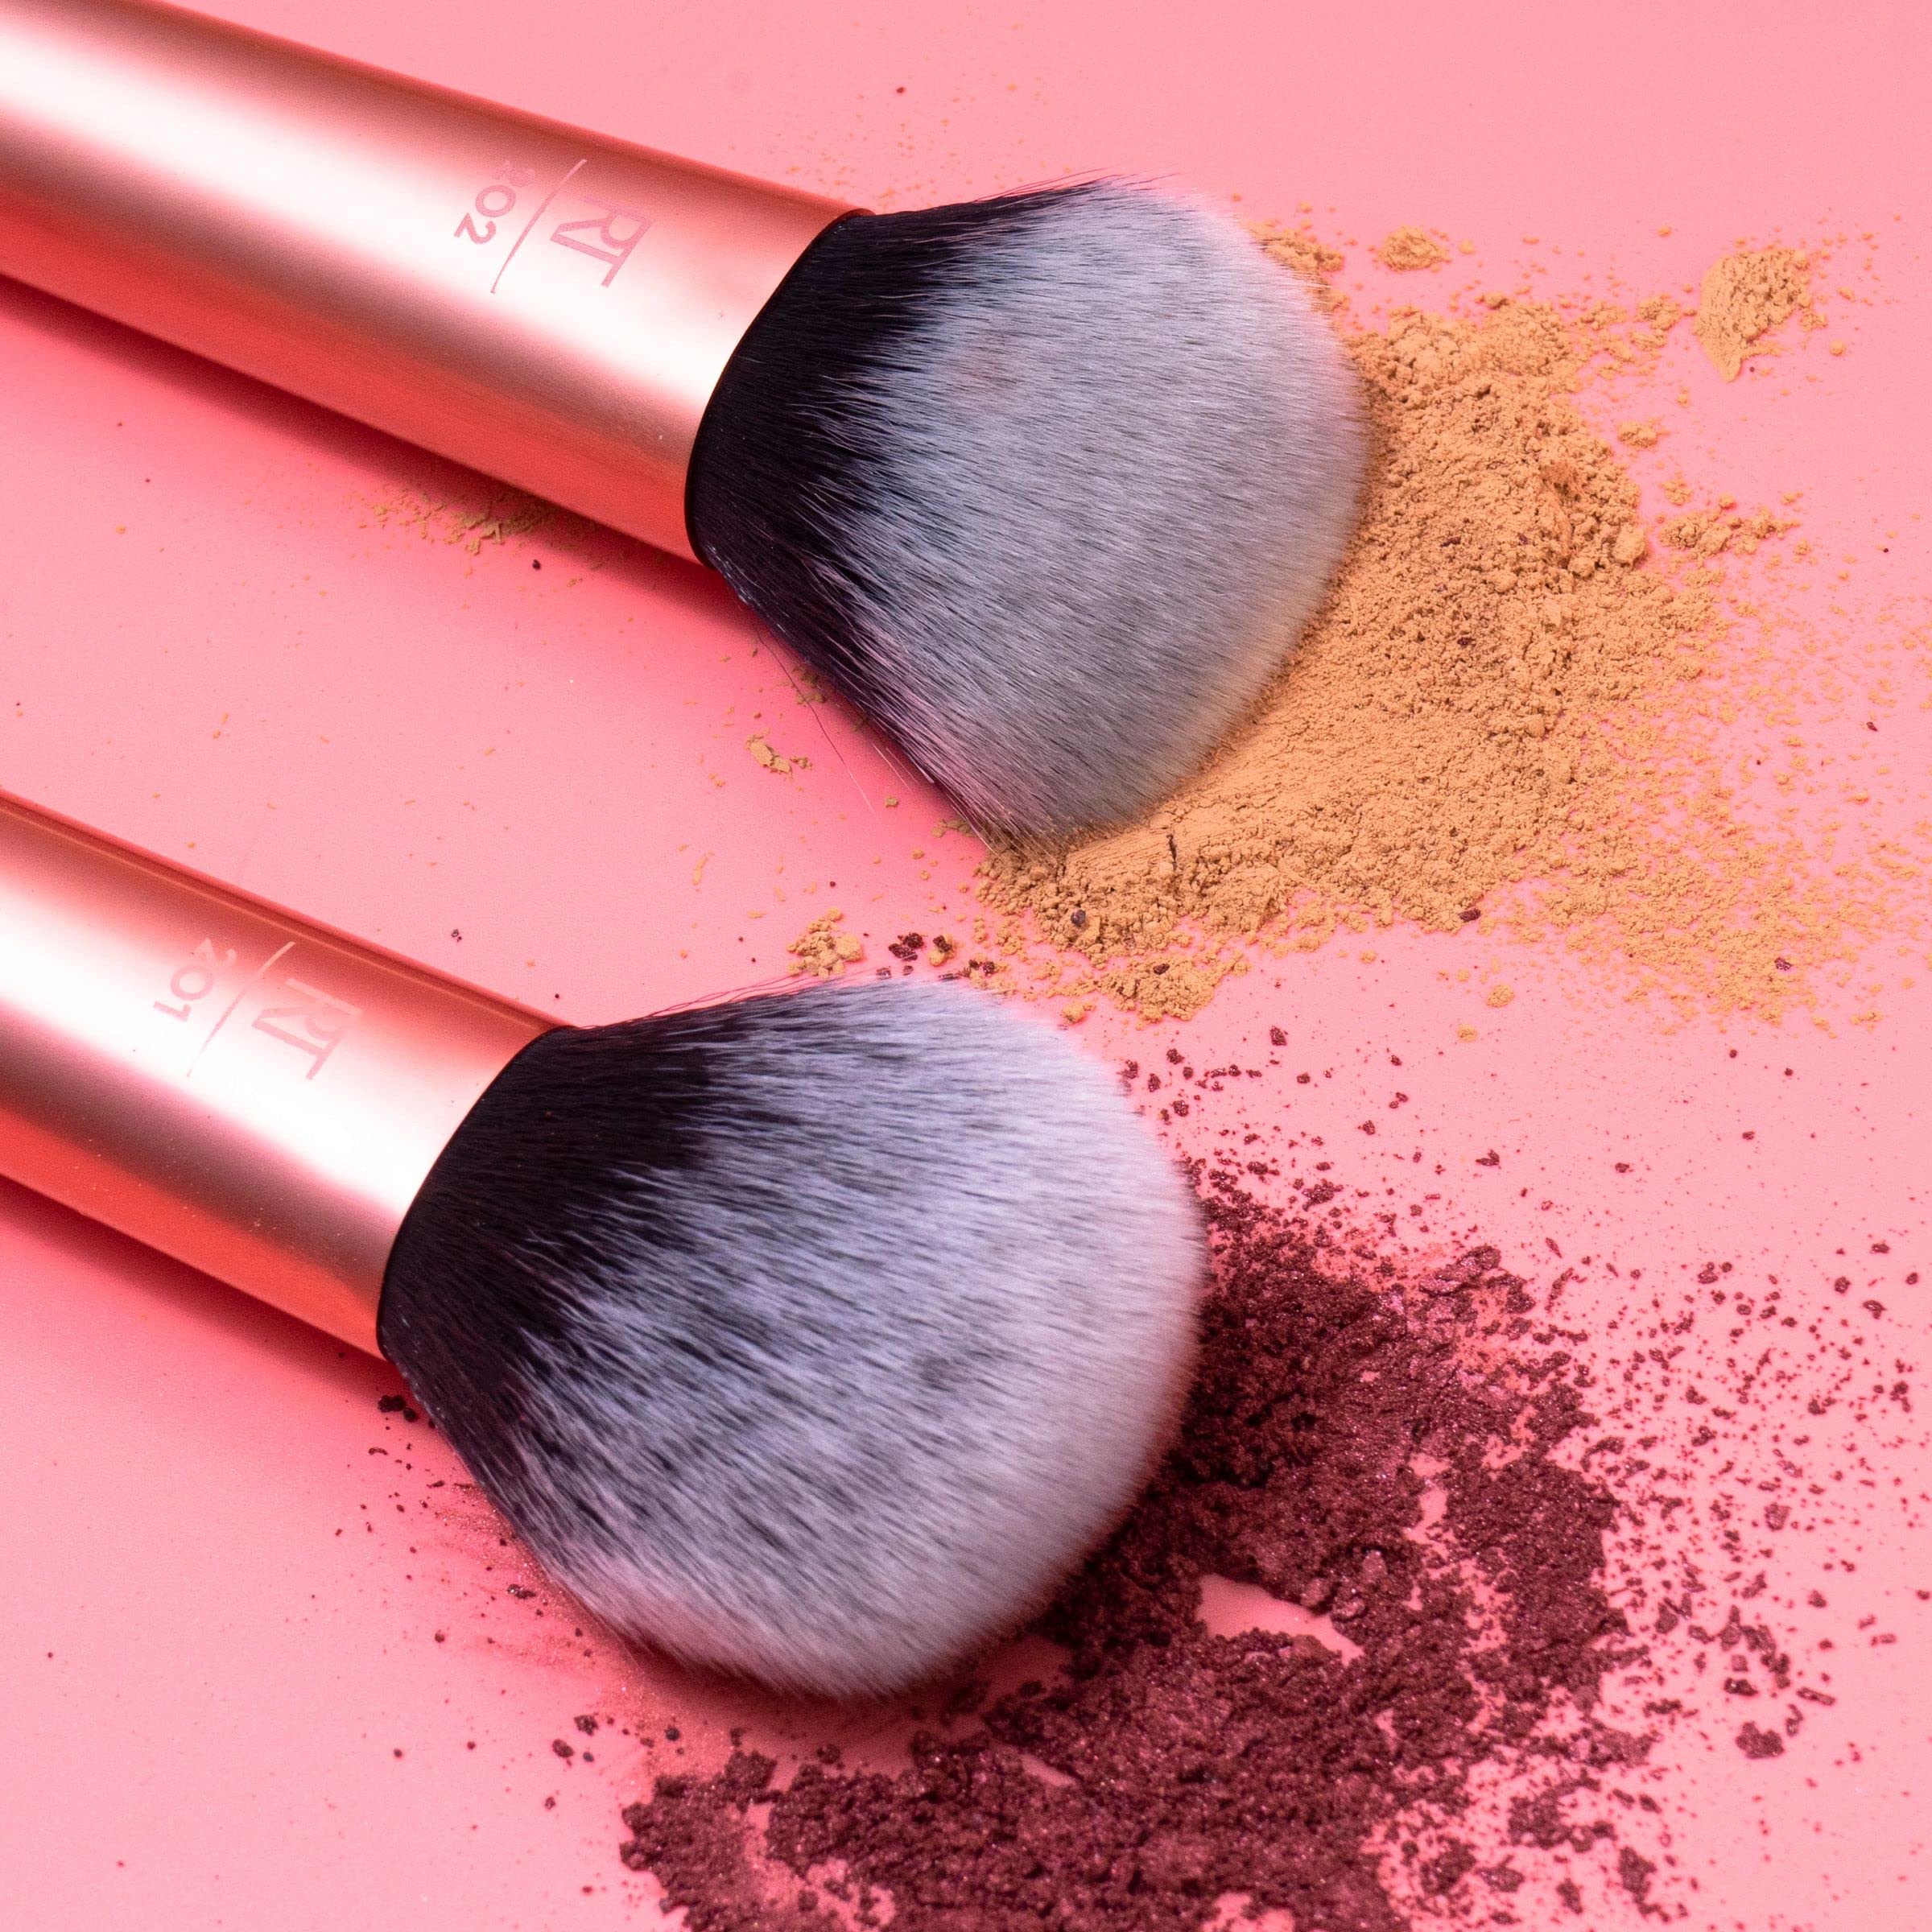 Real Techniques Ultra Plush Powder Makeup Brush, For Setting Powder, Bronzer, & Blush, Sheer, Buildable Coverage, Large, Fluffy Powder Brush, Vegan, Cruelty-Free & Synthetic Bristles, 1 Count